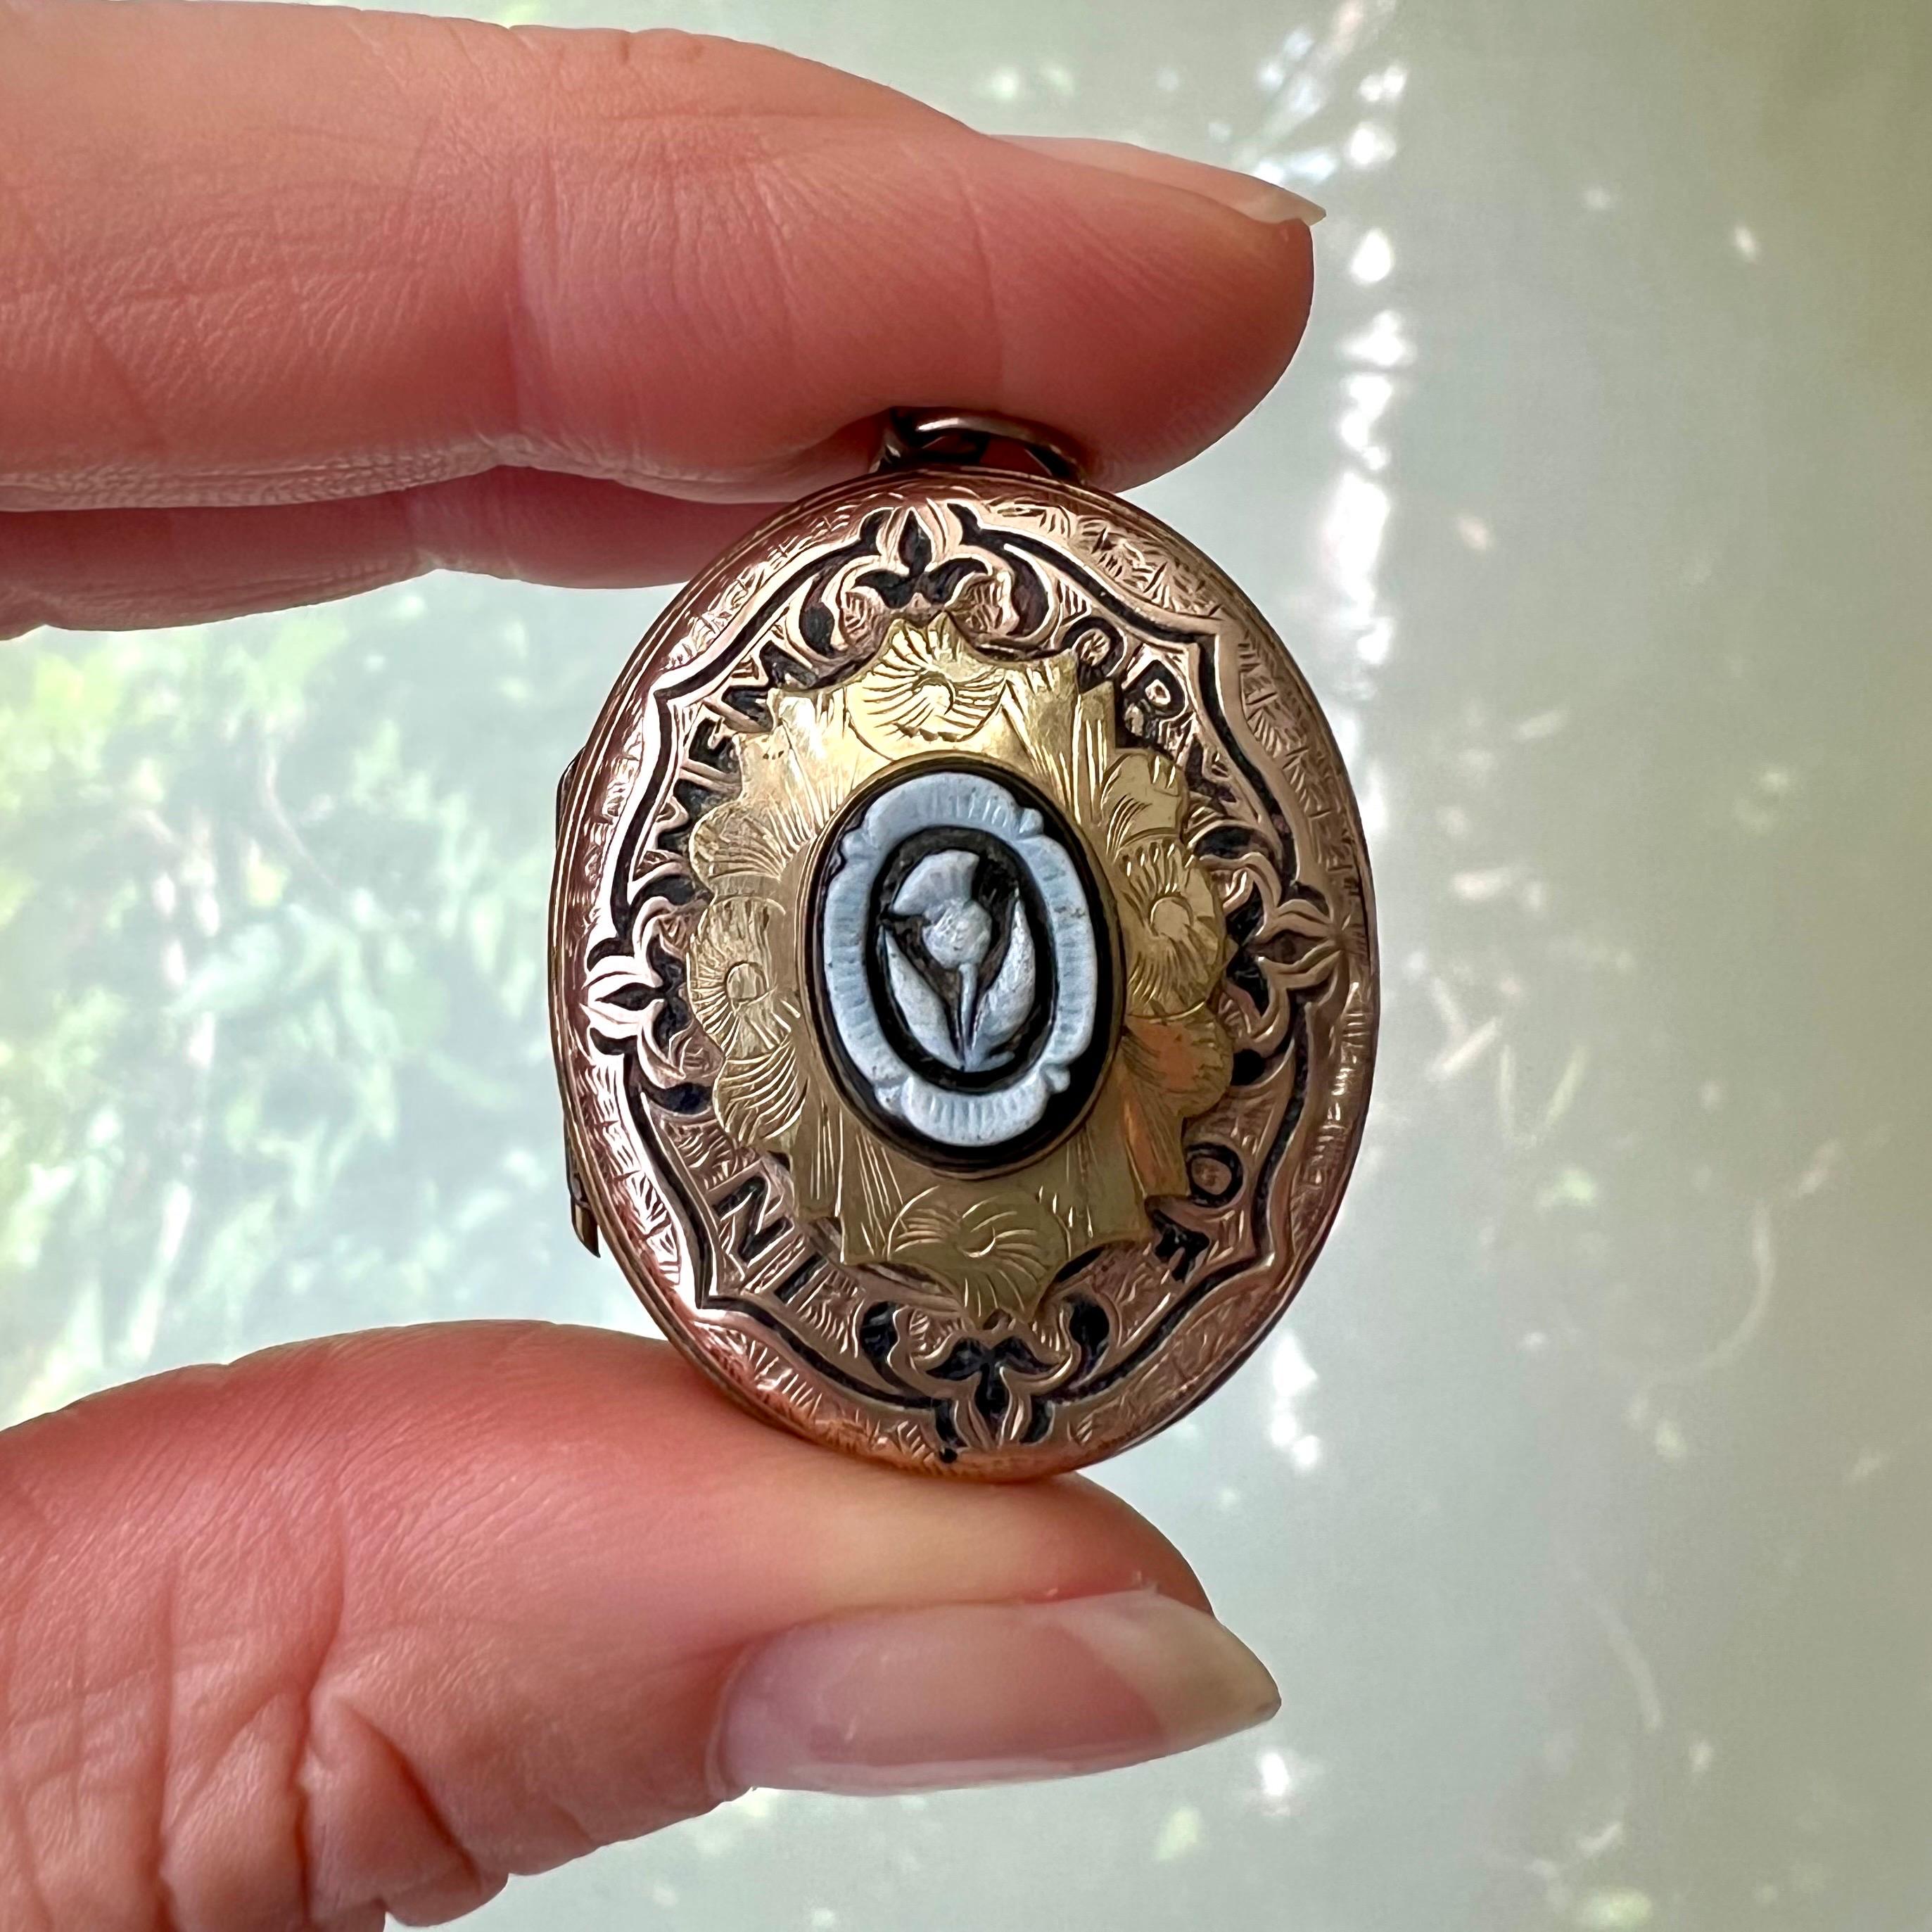 A very charming antique Victorian rose and yellow gold mourning locket. This beautiful oval locket features an engraved front and back. The front is decorated with black enamel around the center panel and engraved with the words “IN MEMORY OF”. The